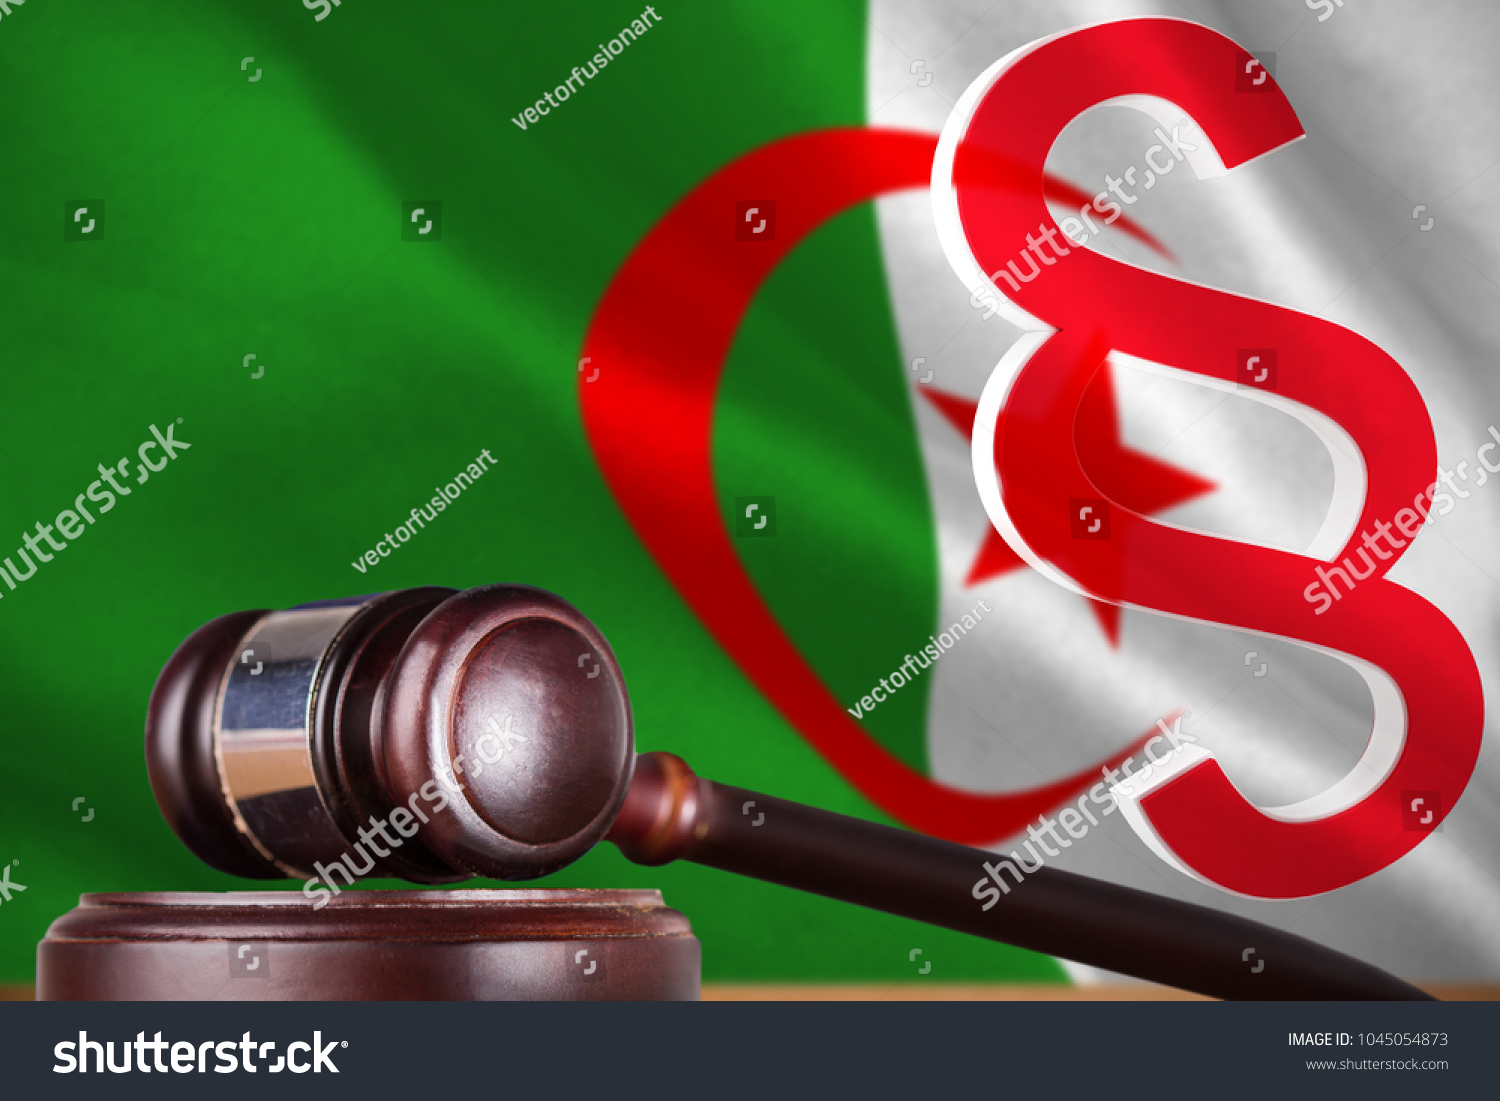 Vector icon of section symbol against digitally generated algerian national flag #1045054873